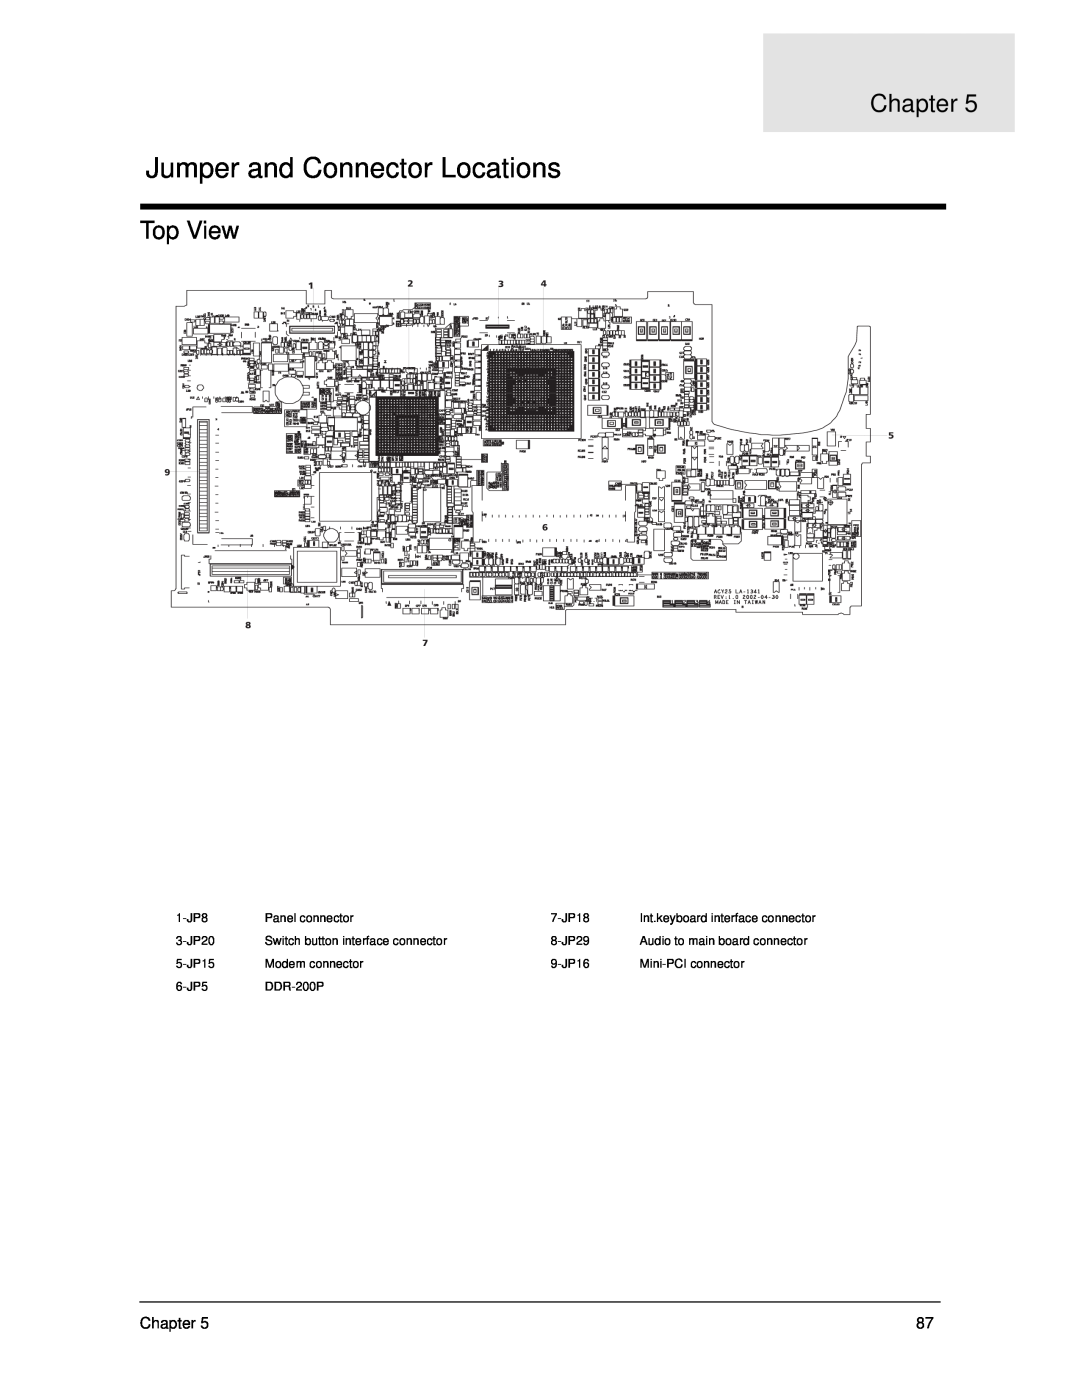 Acer 270 manual Jumper and Connector Locations, Top View, Chapter 